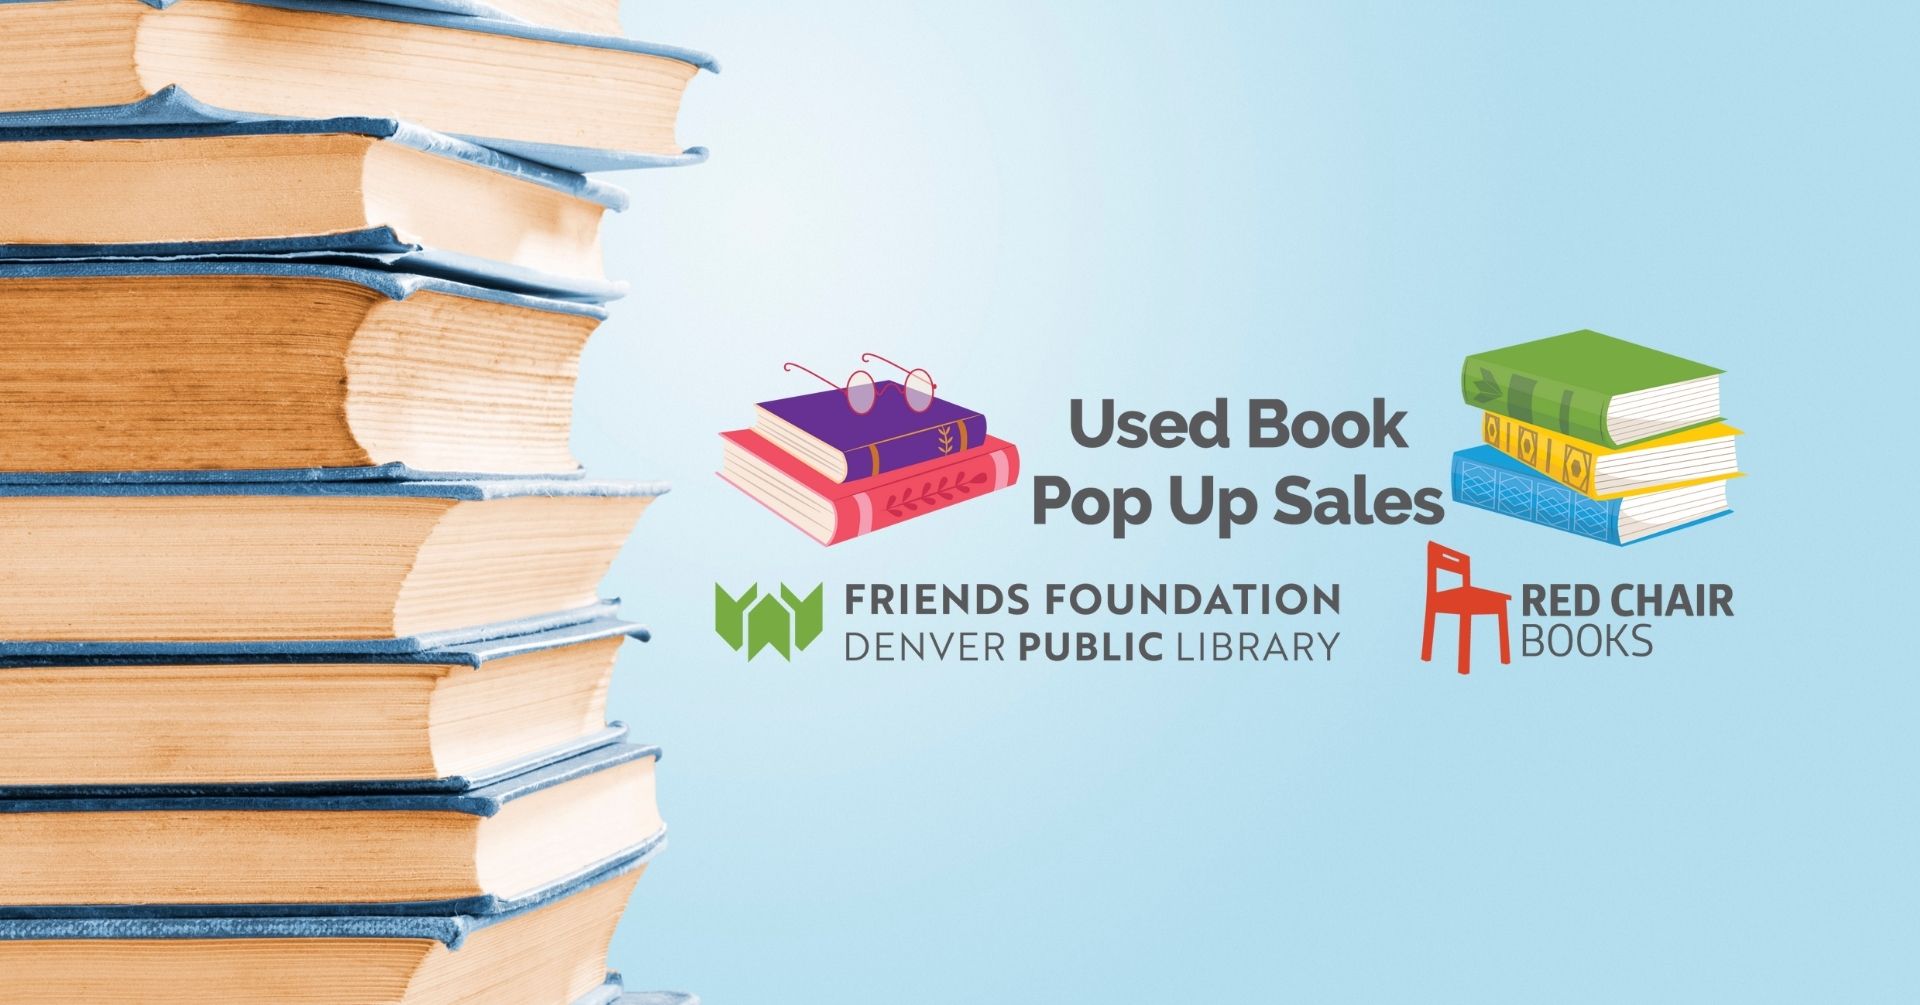 Winter of Reading Used Book Pop Up Sale